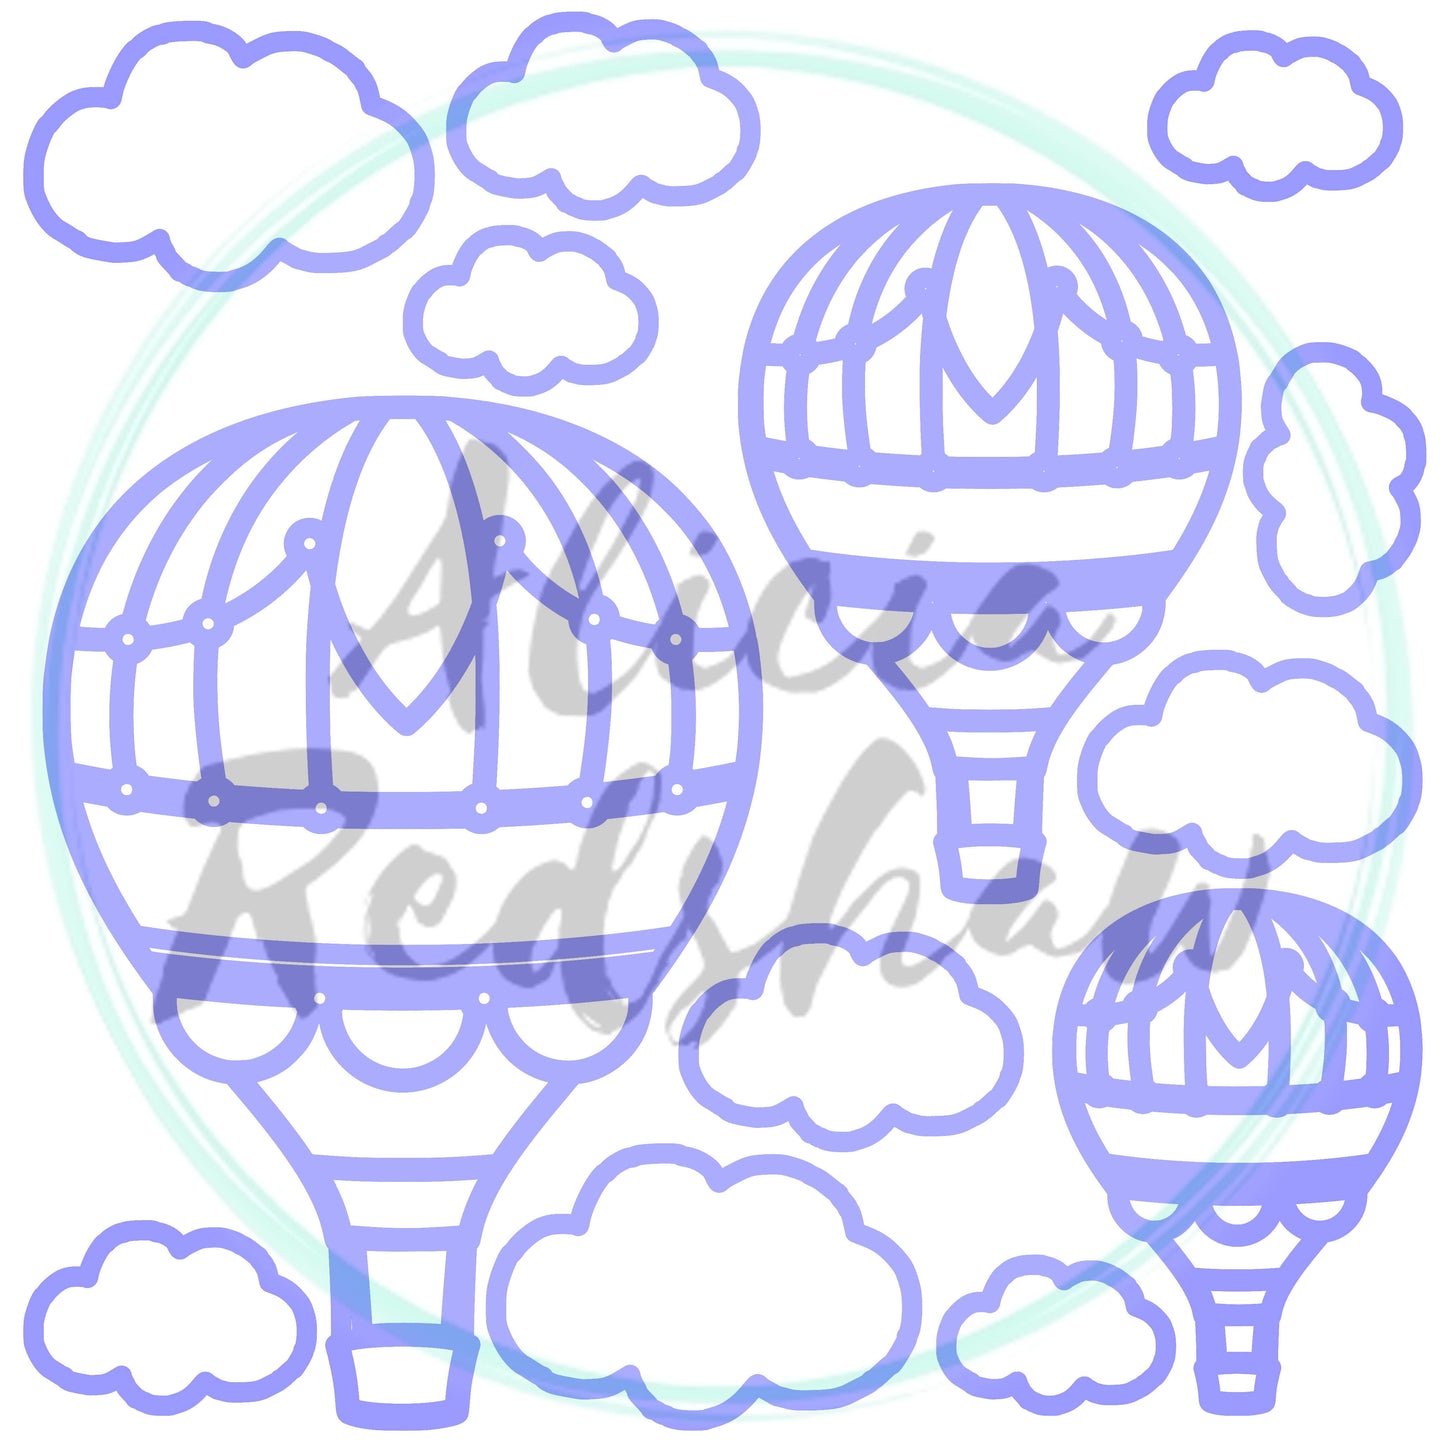 Hot Air Balloons 2 12"x12" White Linen Project-Cut - Designed by Alicia Redshaw